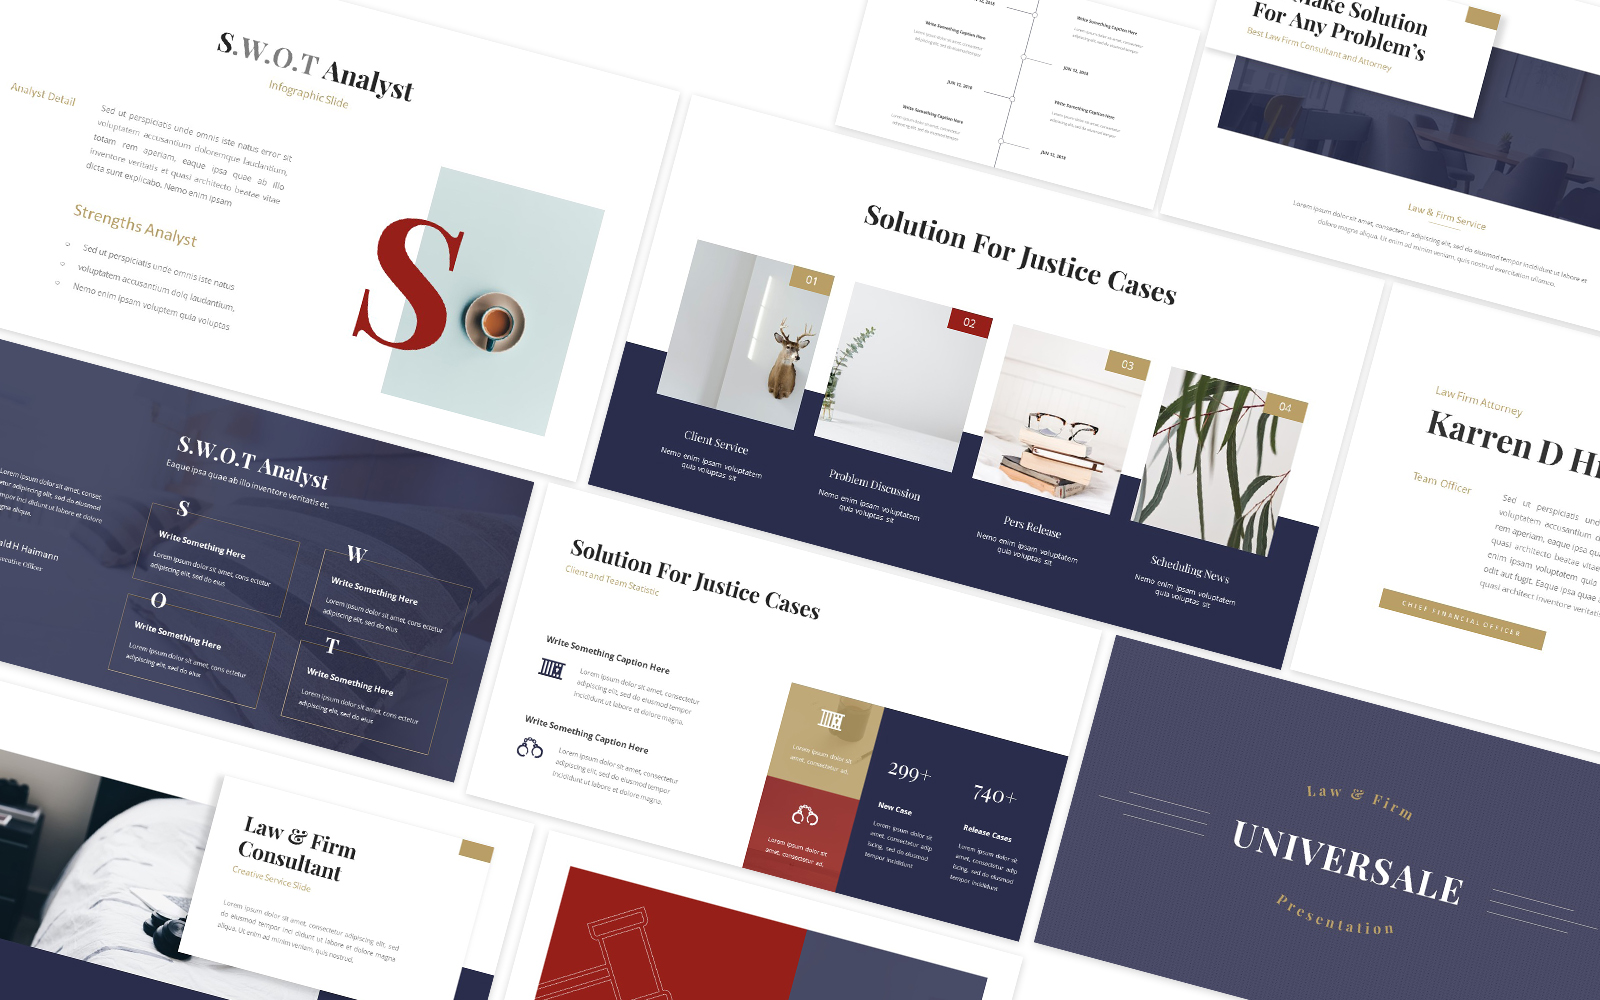 Universale Law & Firm Keynote Template